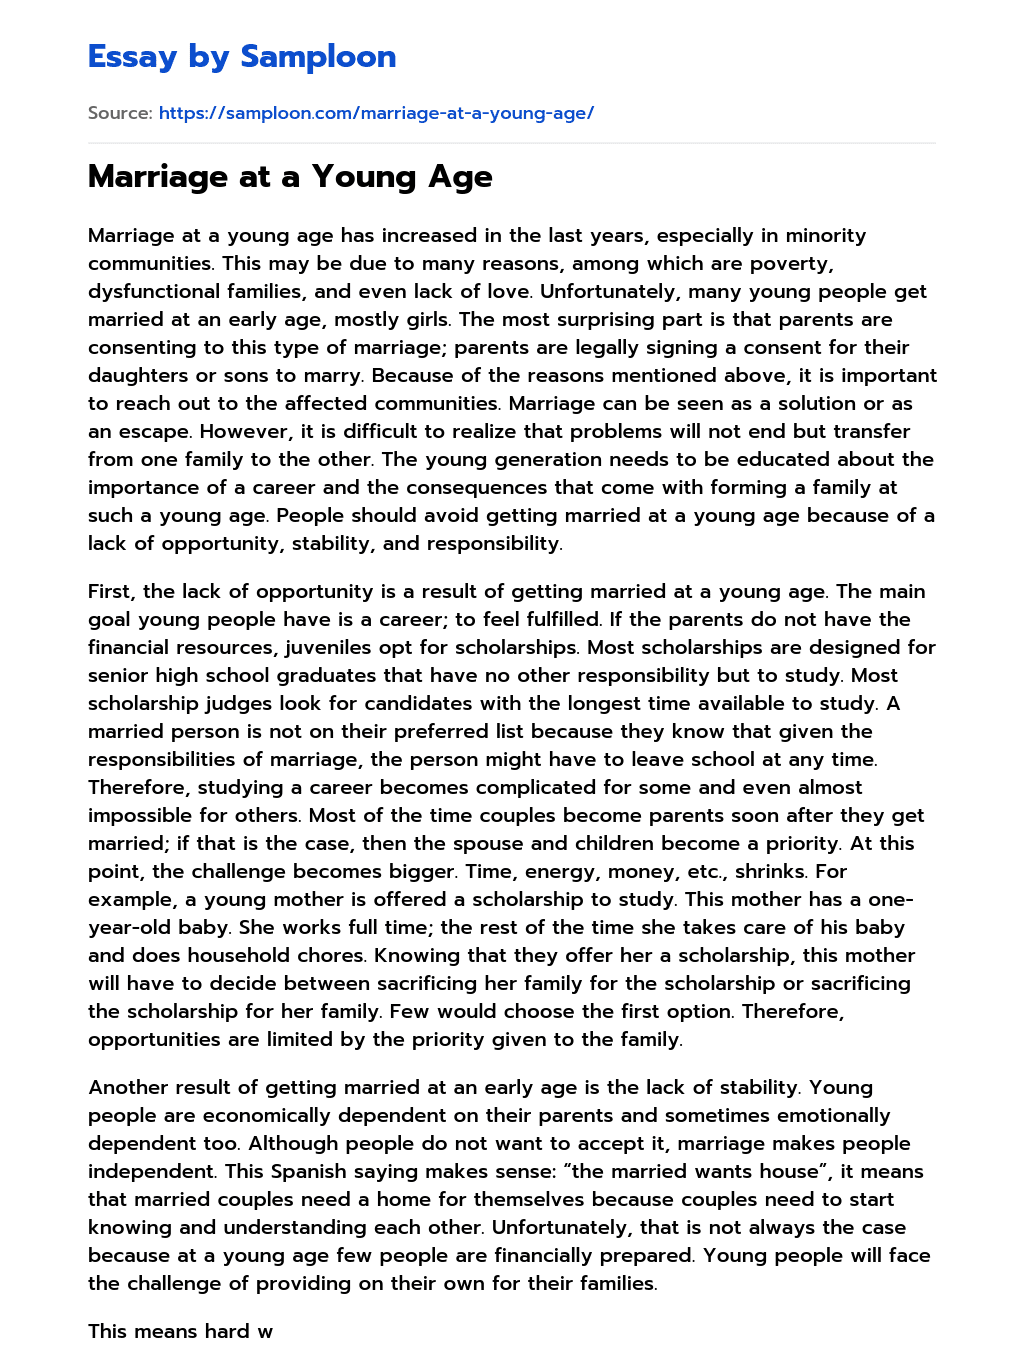 Marriage at a Young Age essay